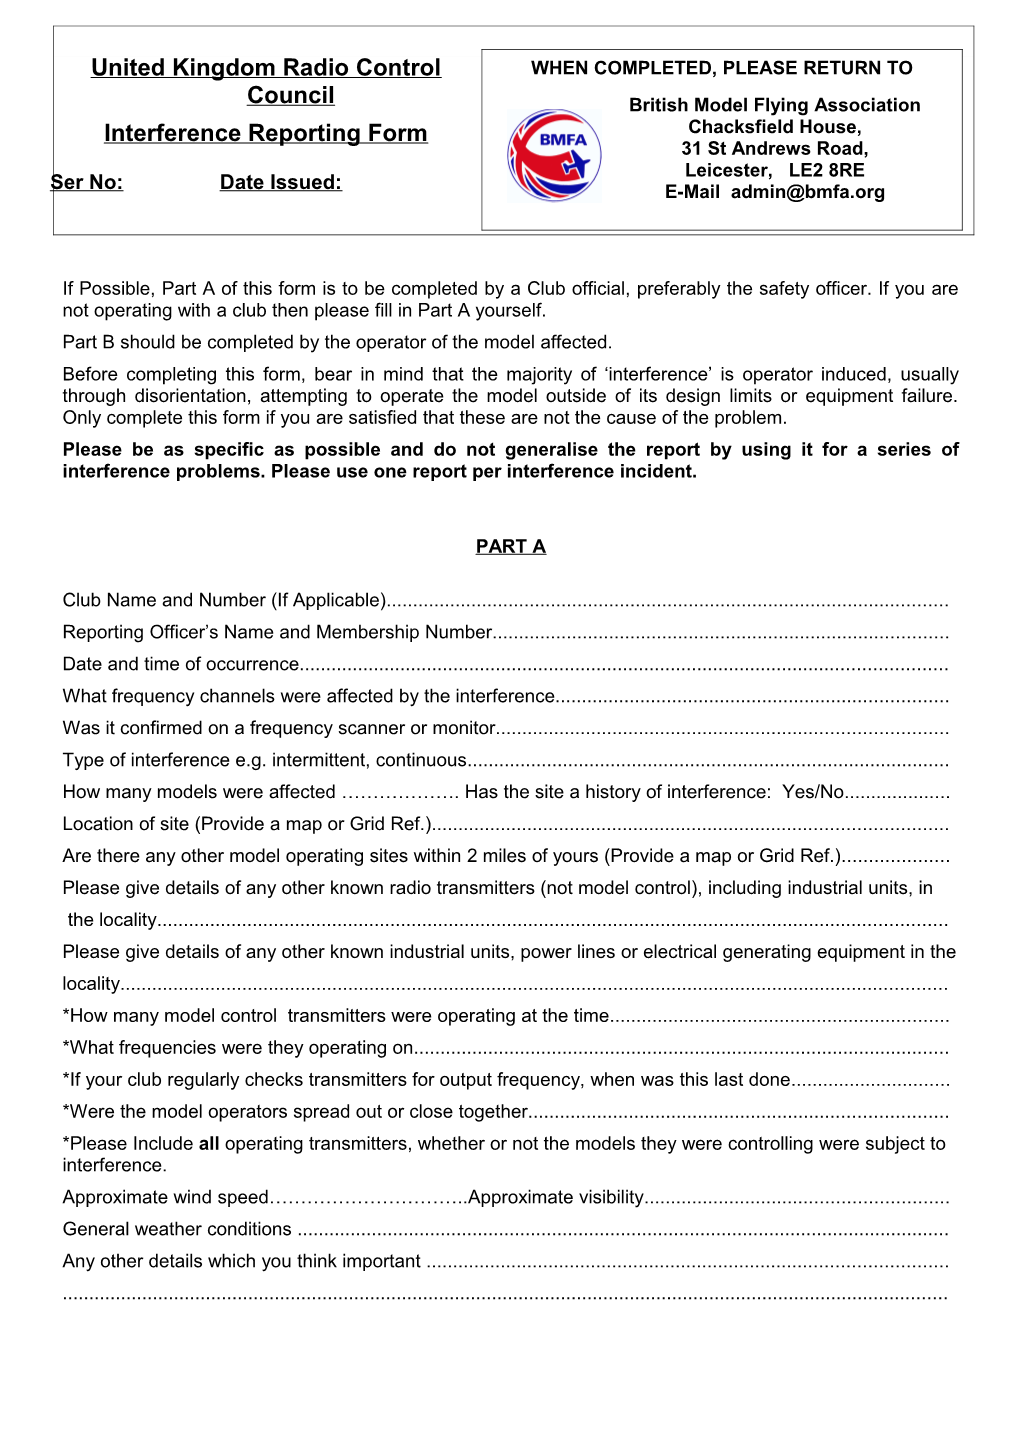 Interference Reporting Form